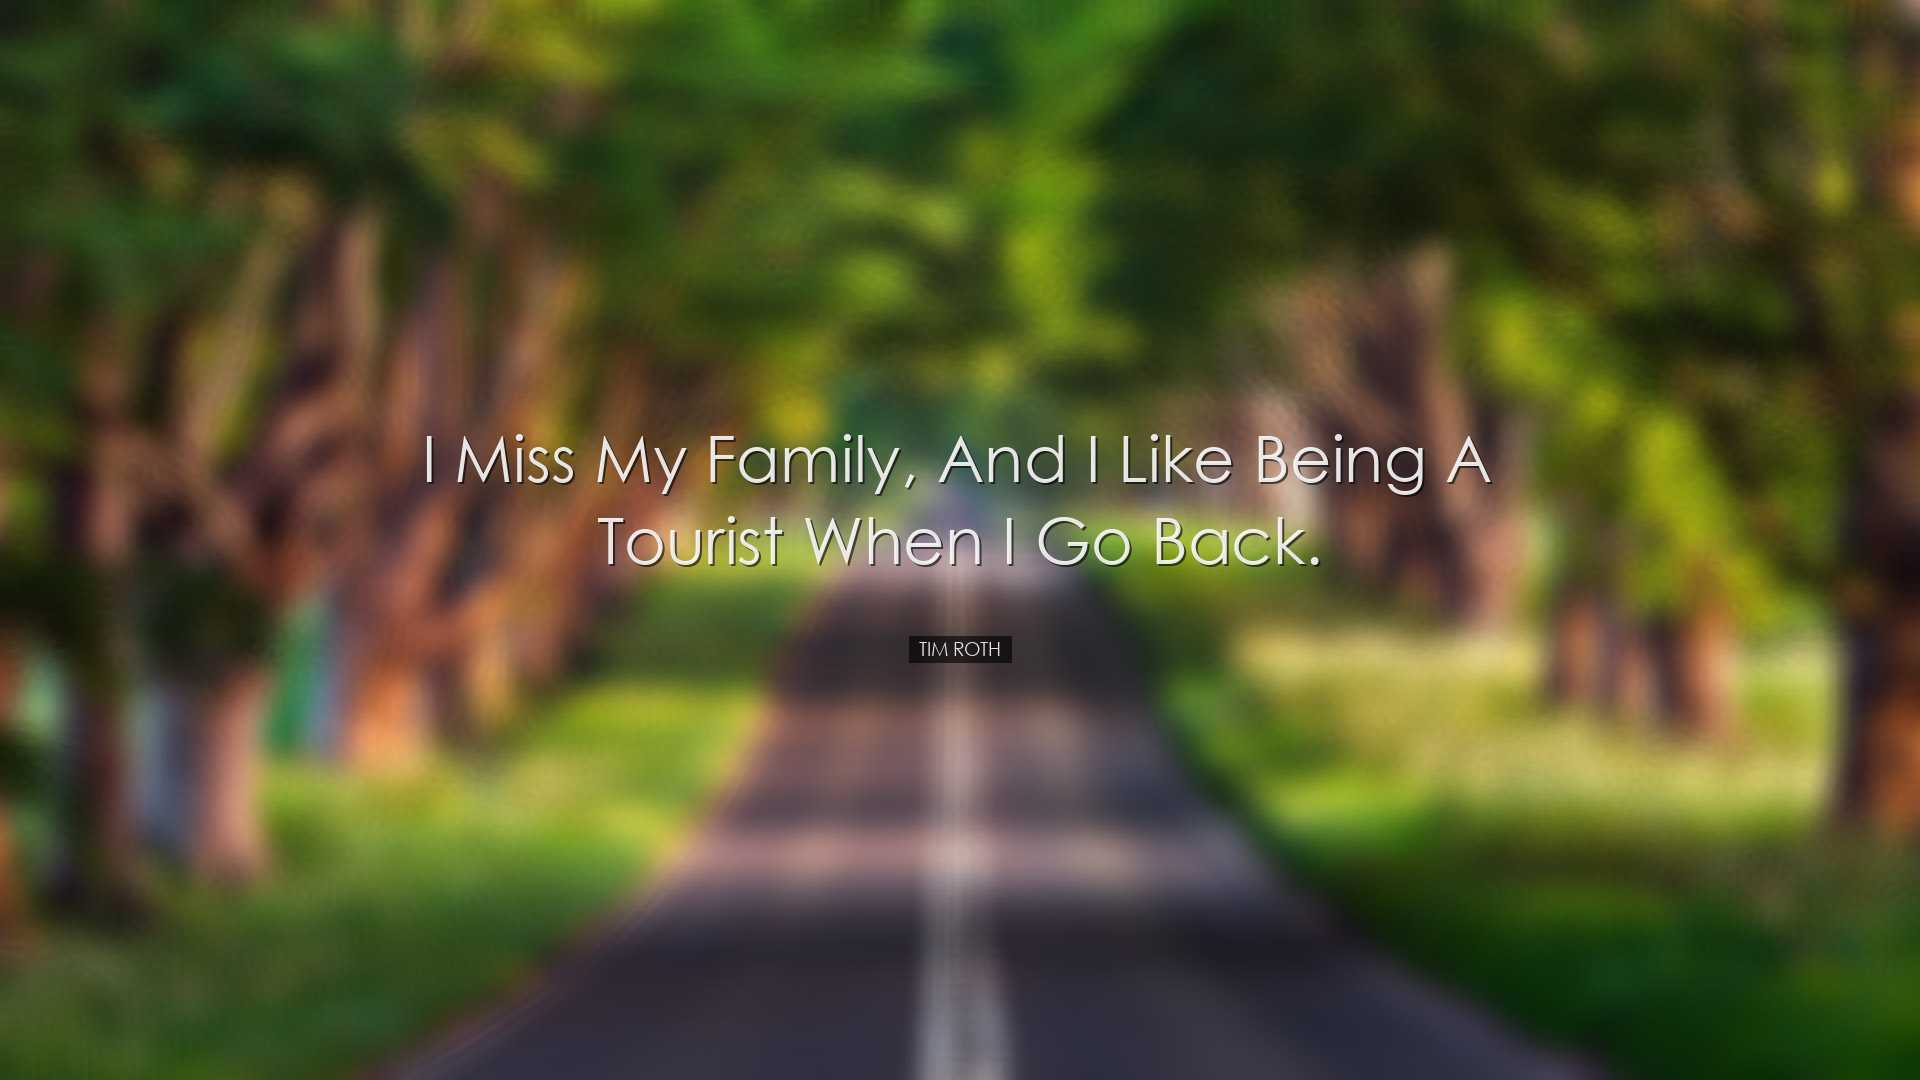 I miss my family, and I like being a tourist when I go back. - Tim